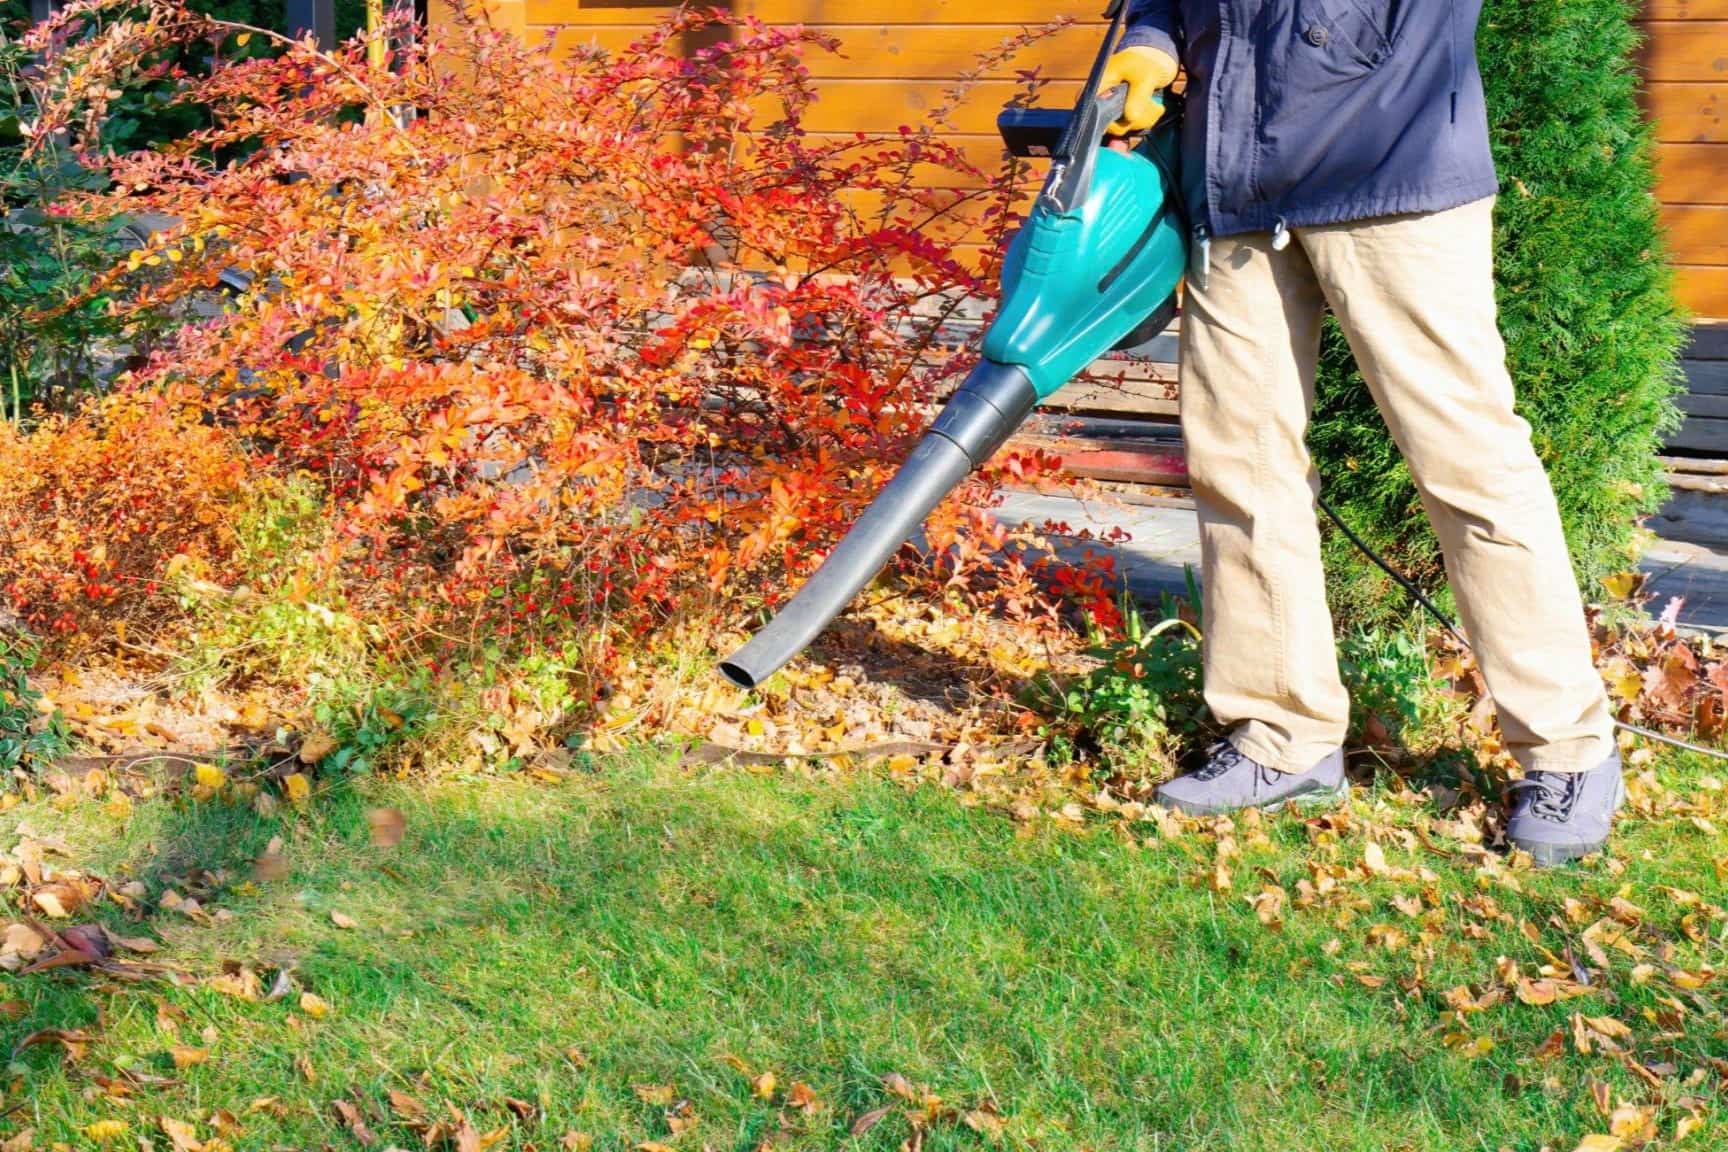 How To Dispose Of A Leaf Blower